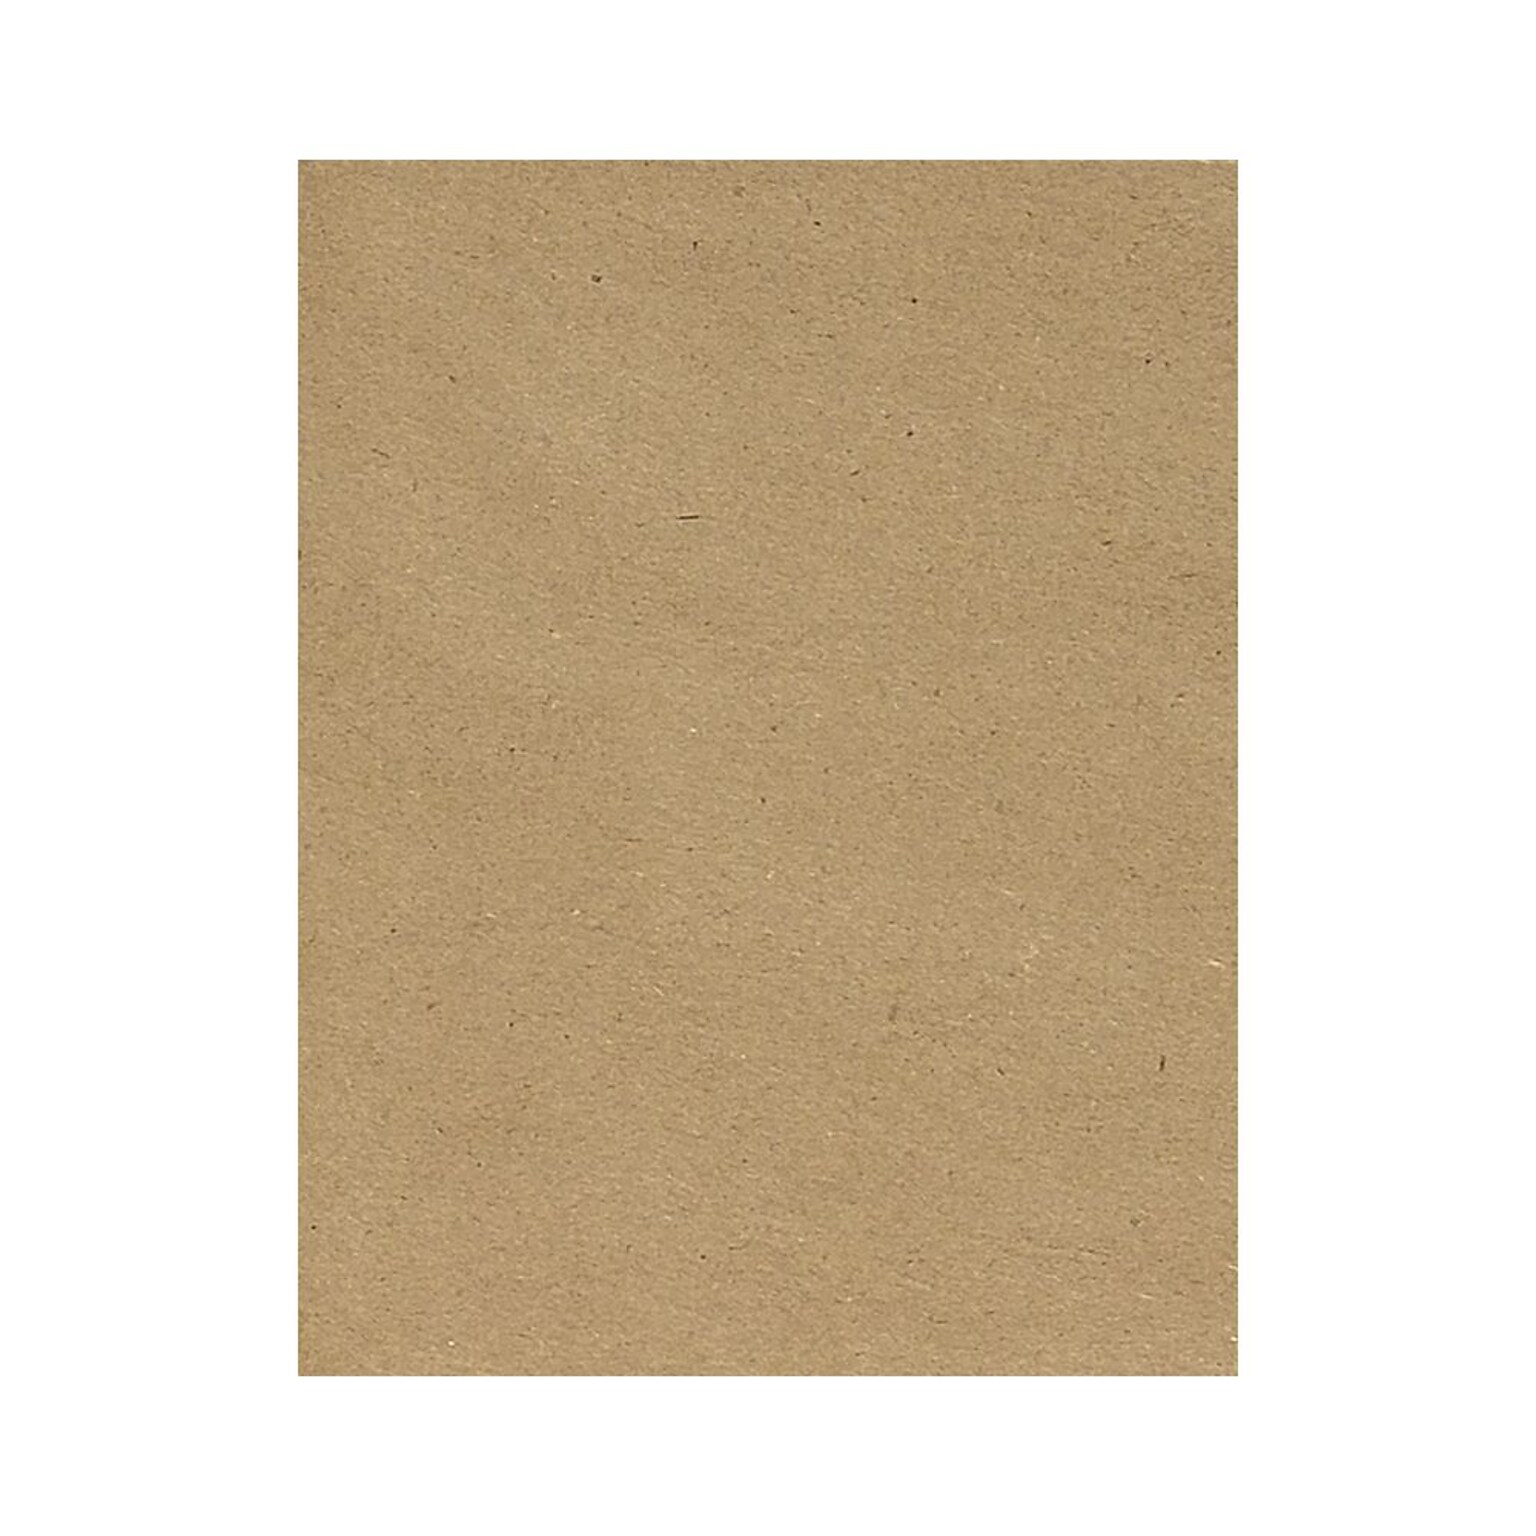 LUX 65 lb. Cardstock Paper, 8.5 x 11, Grocery Bag Brown, 250 Sheets/Pack (81211-C-46-250)